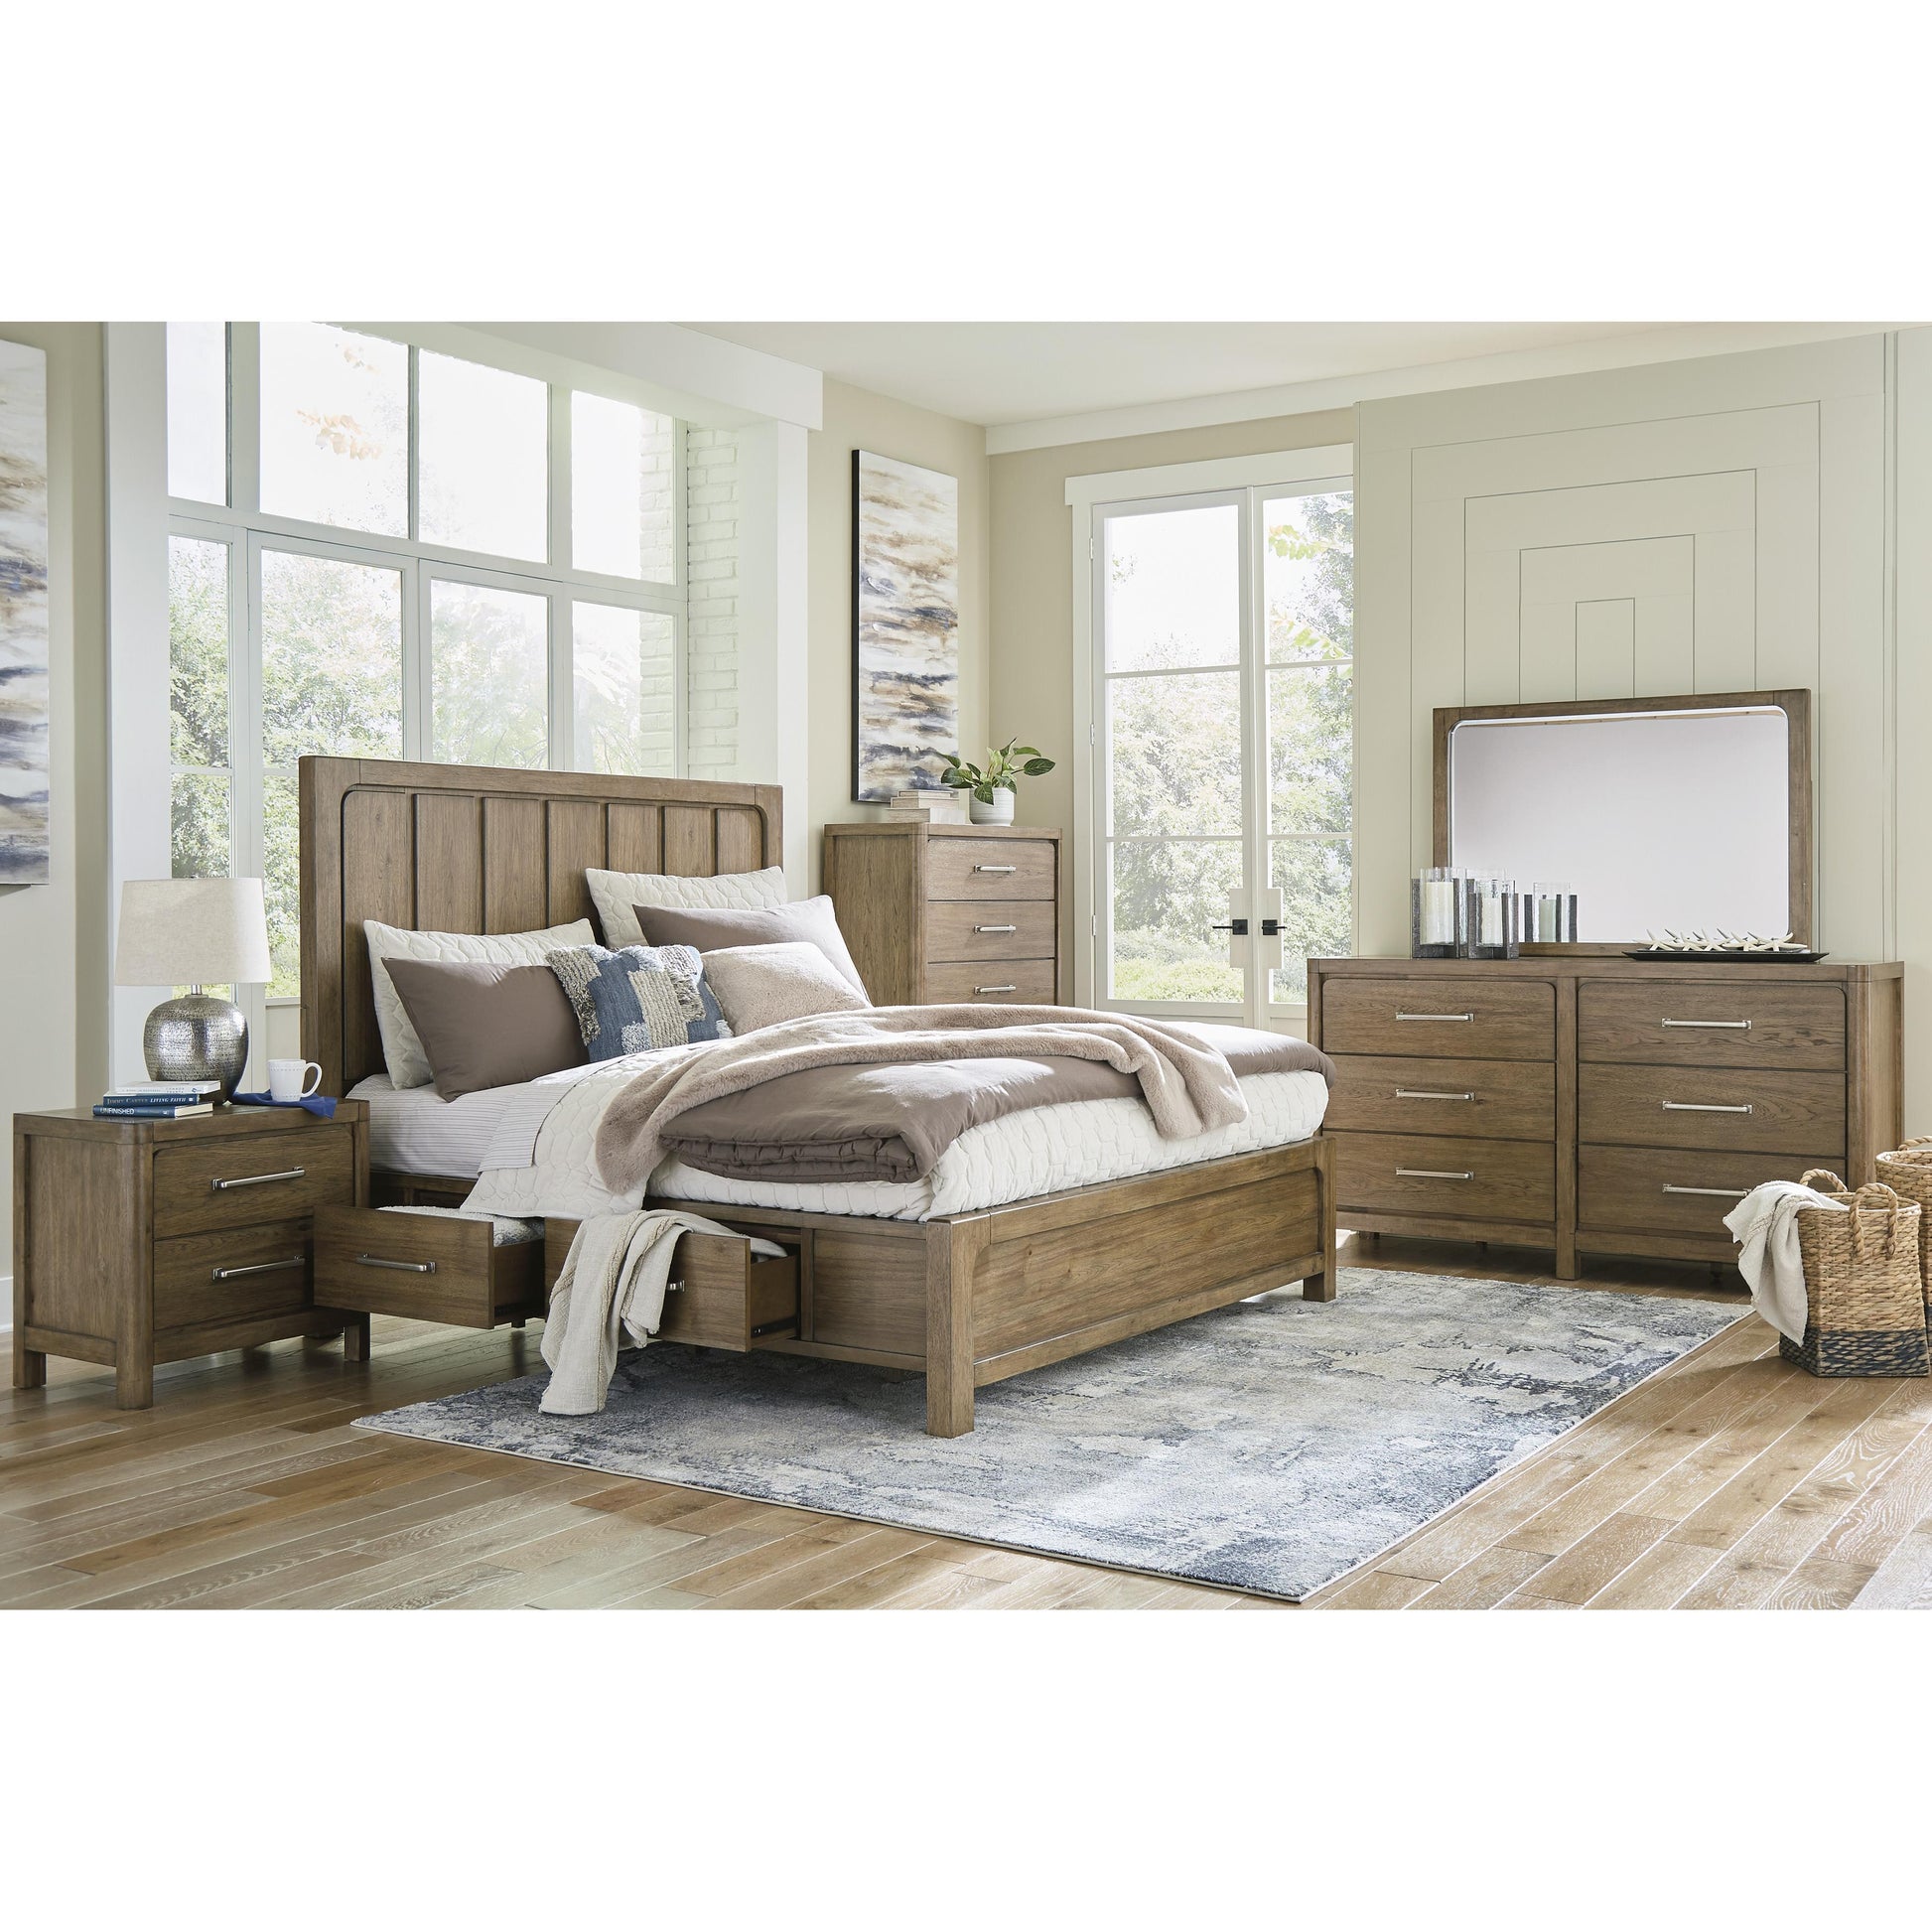 Signature Design by Ashley Cabalynn King Panel Bed with Storage B974-58/B974-56/B974-97S/B974-50 IMAGE 10